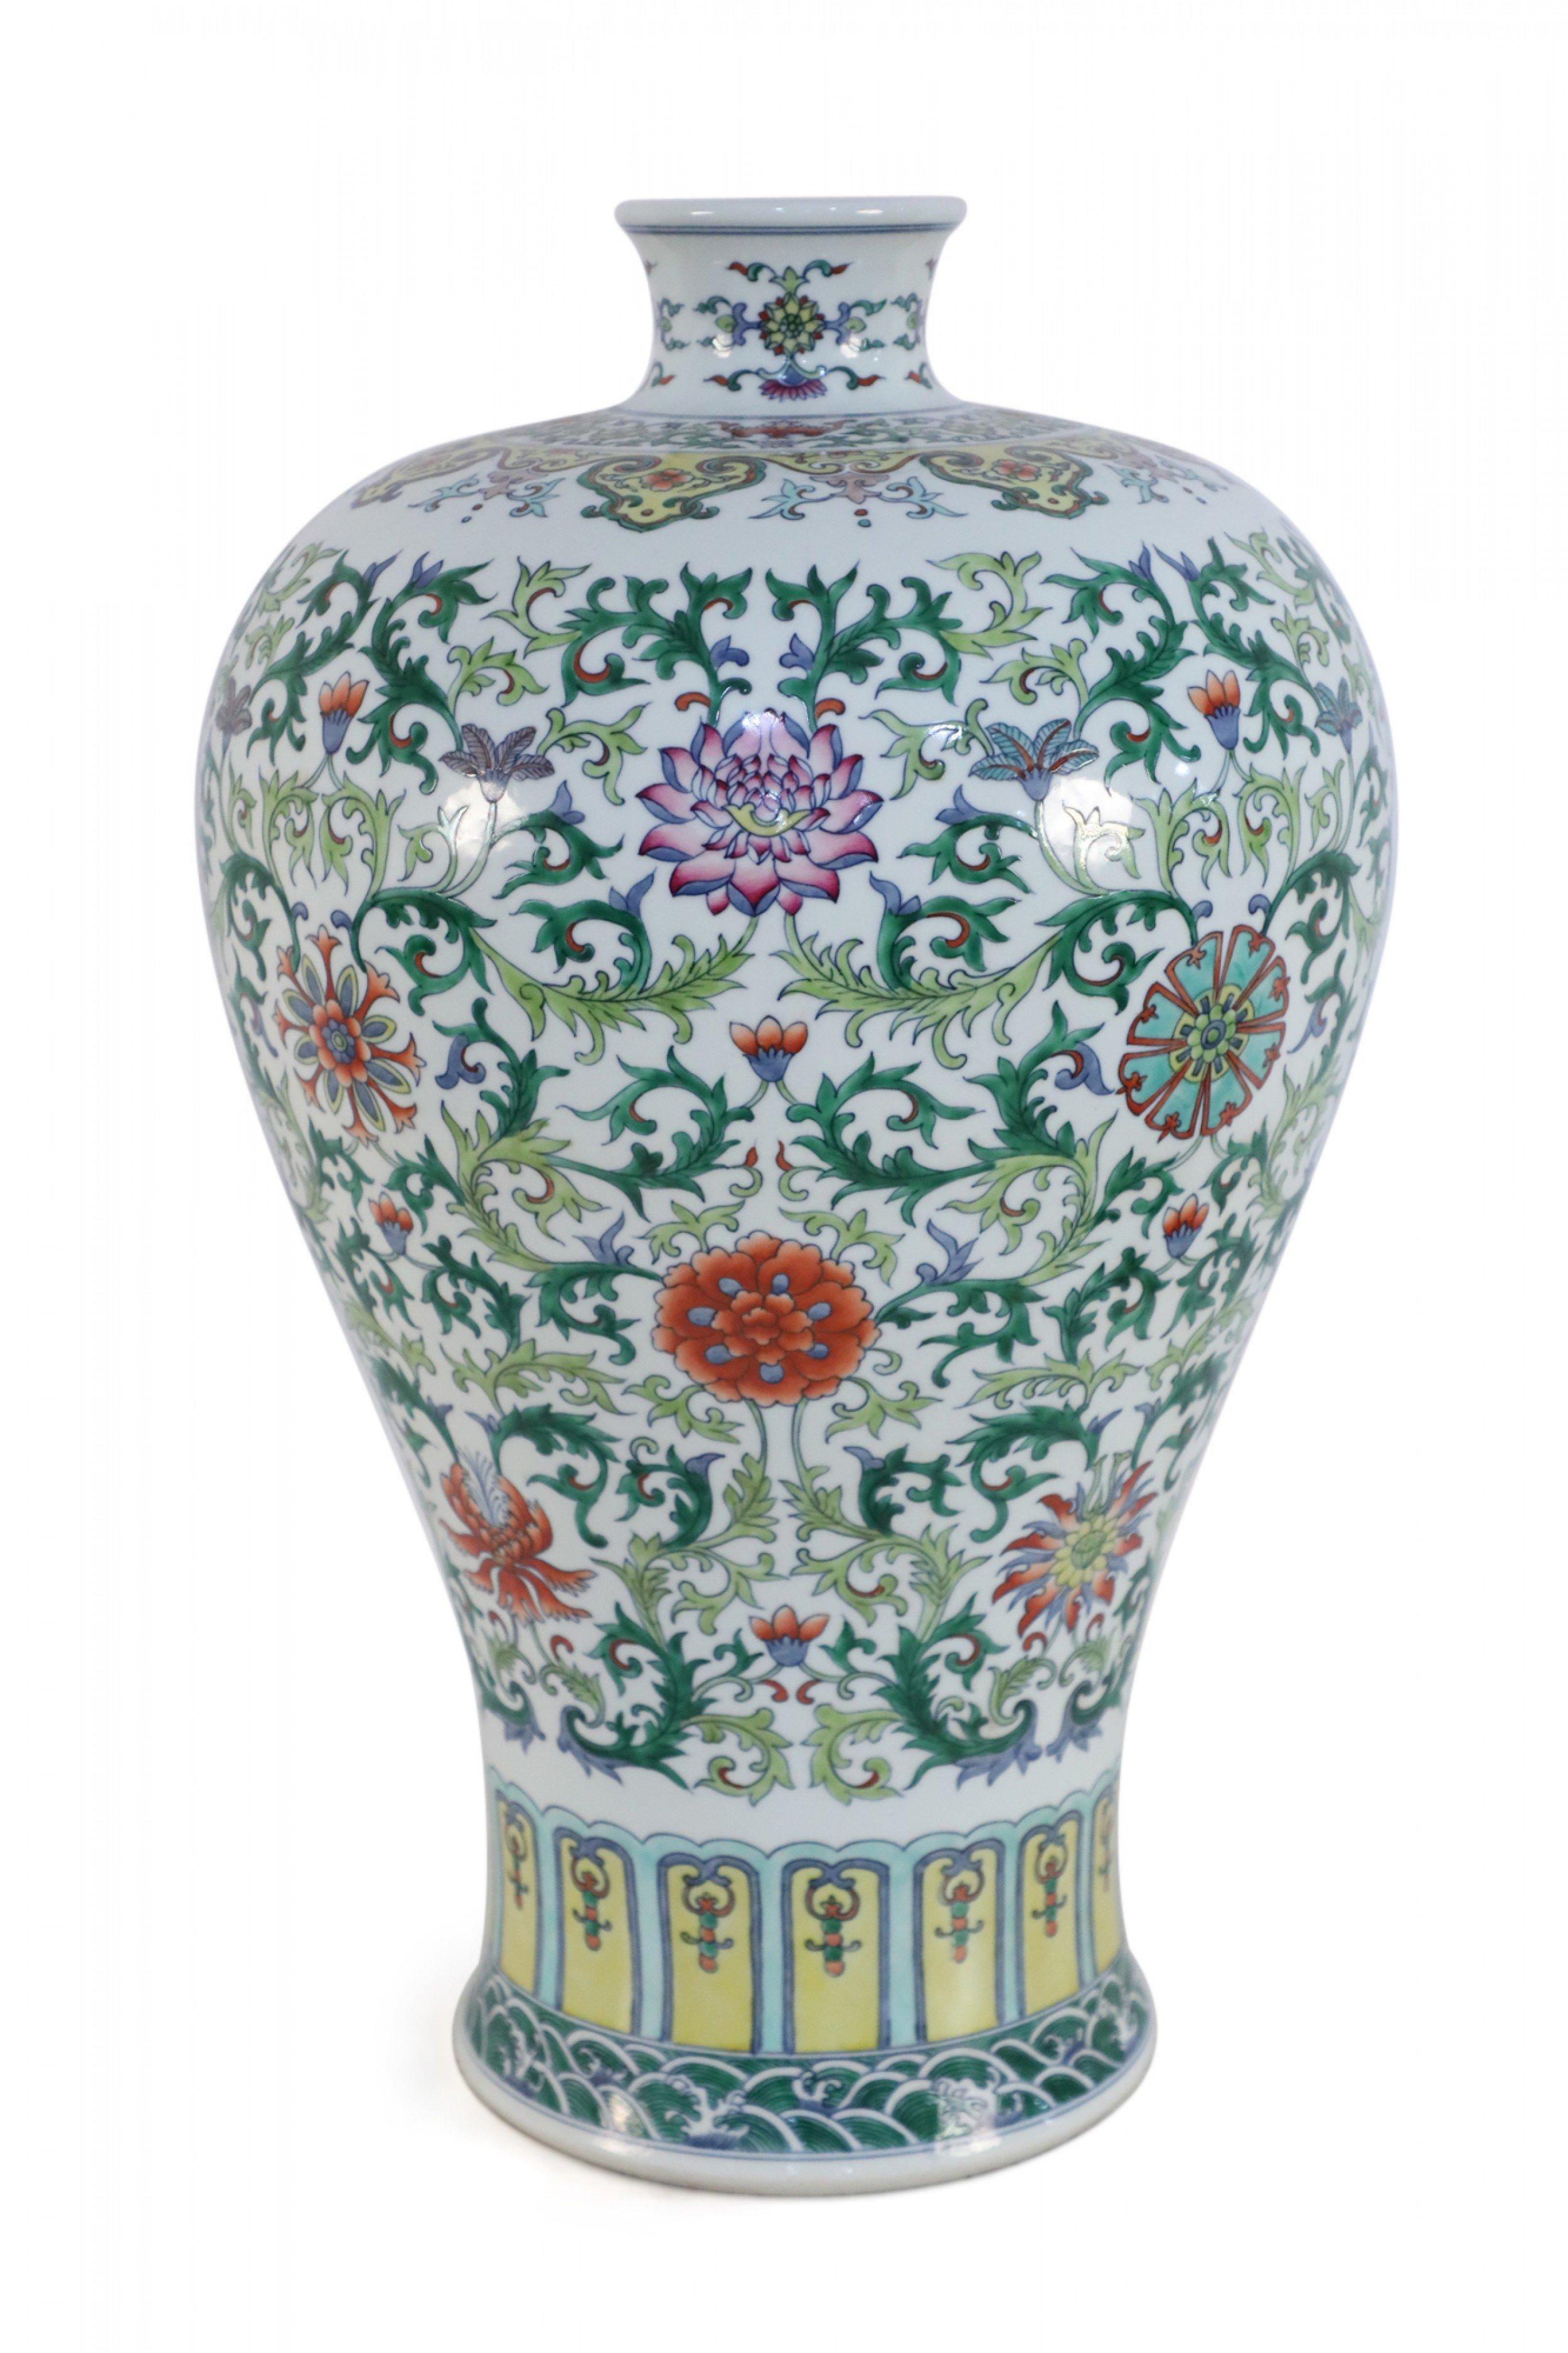 Chinese white porcelain vase with a Meiping form decorated in swirling green vines interspersed with colorful florals.
  